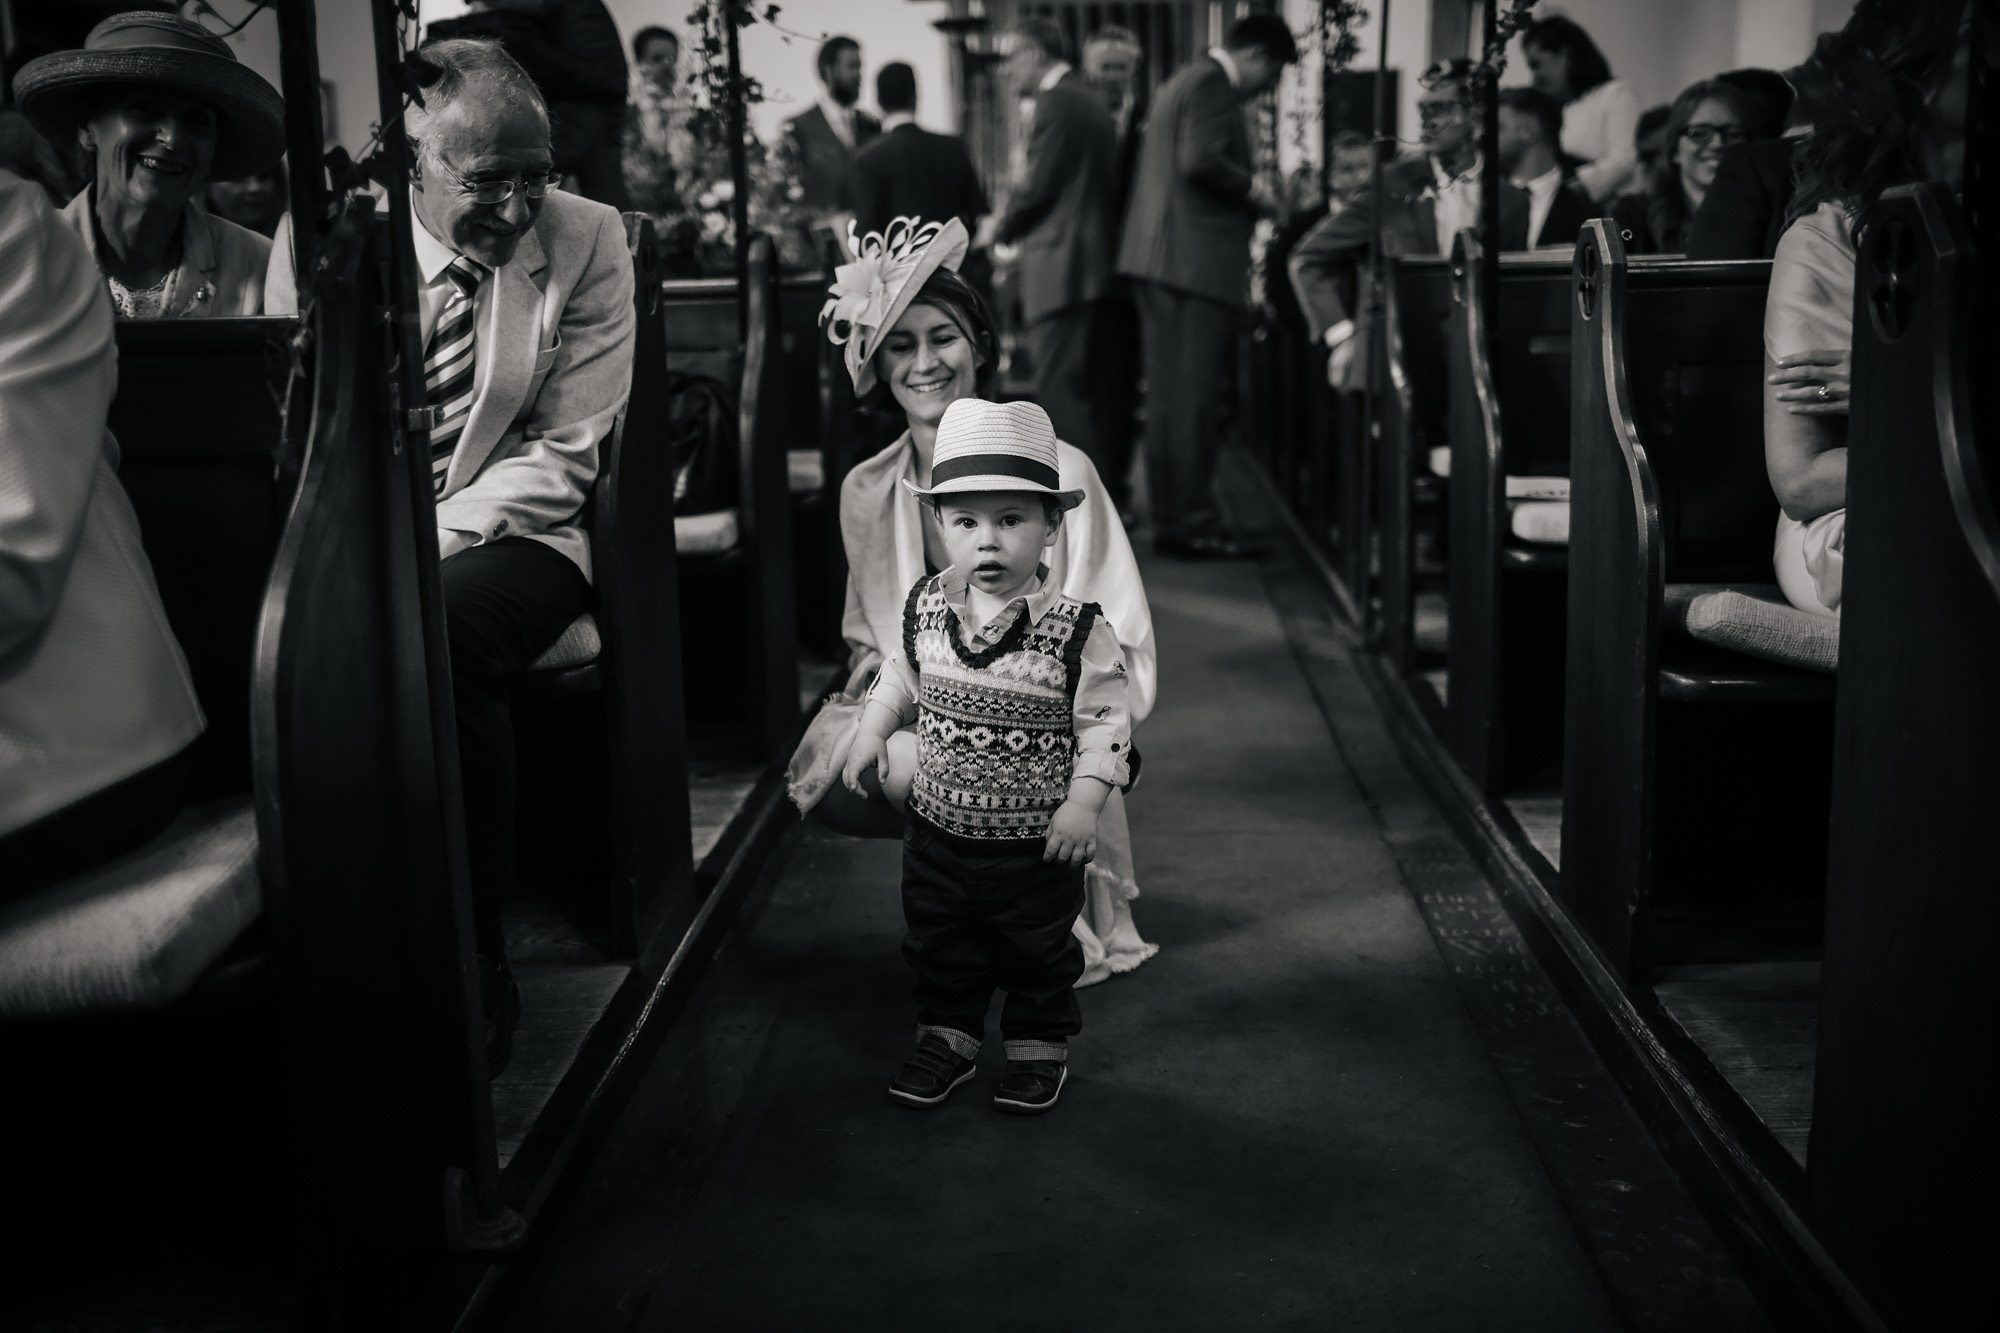 Boy with a hat in the church aisle during the wedding